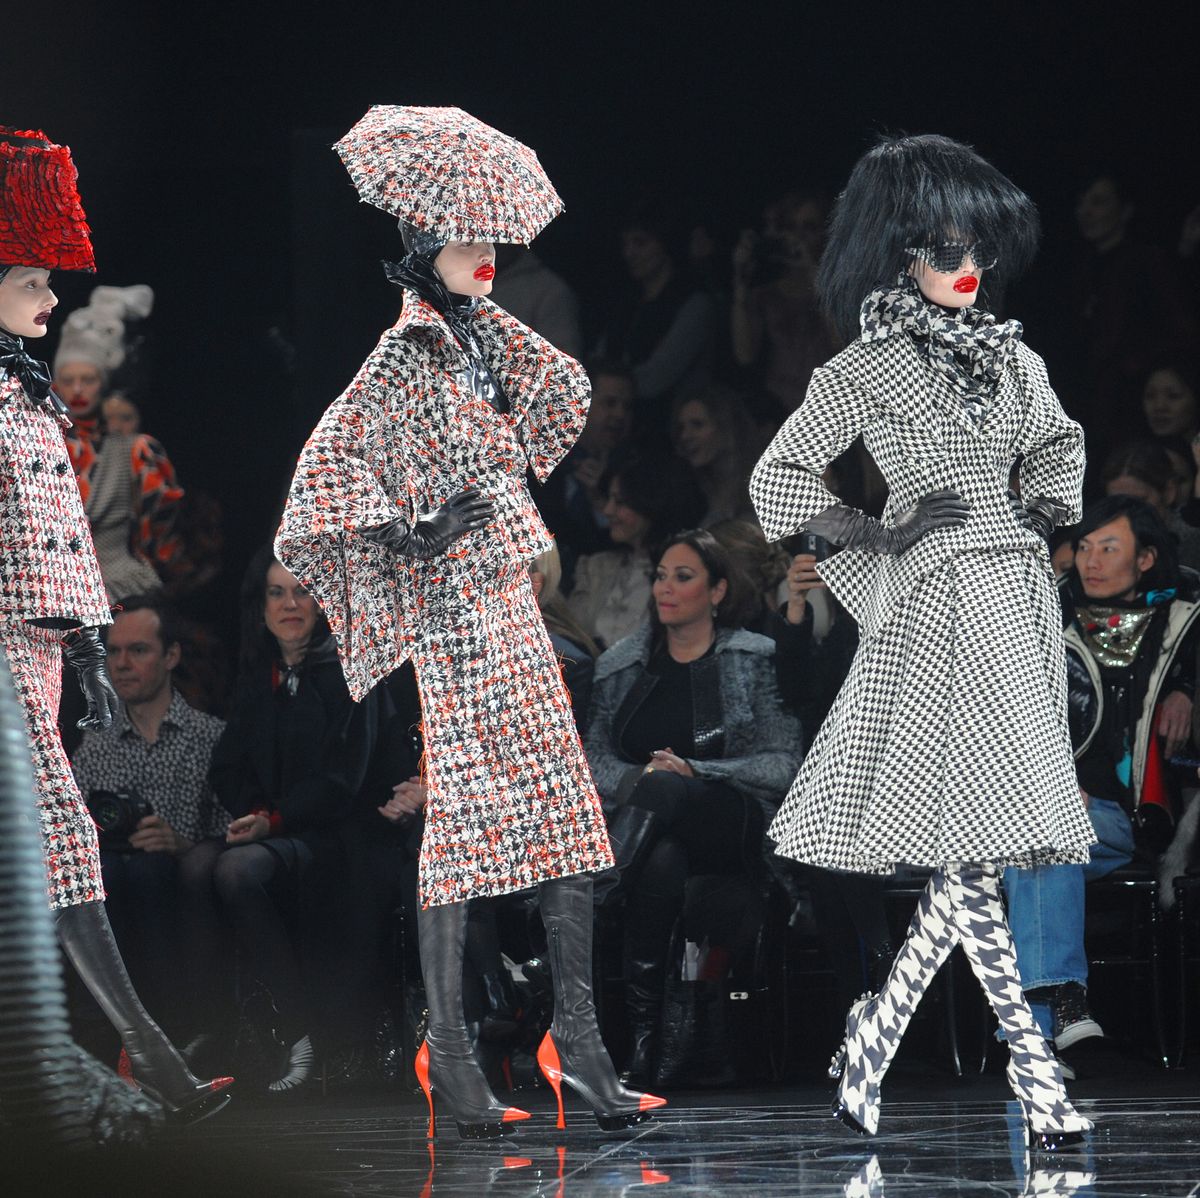 Alexander-McQueen Ready To Wear Fashion Show, Collection Fall